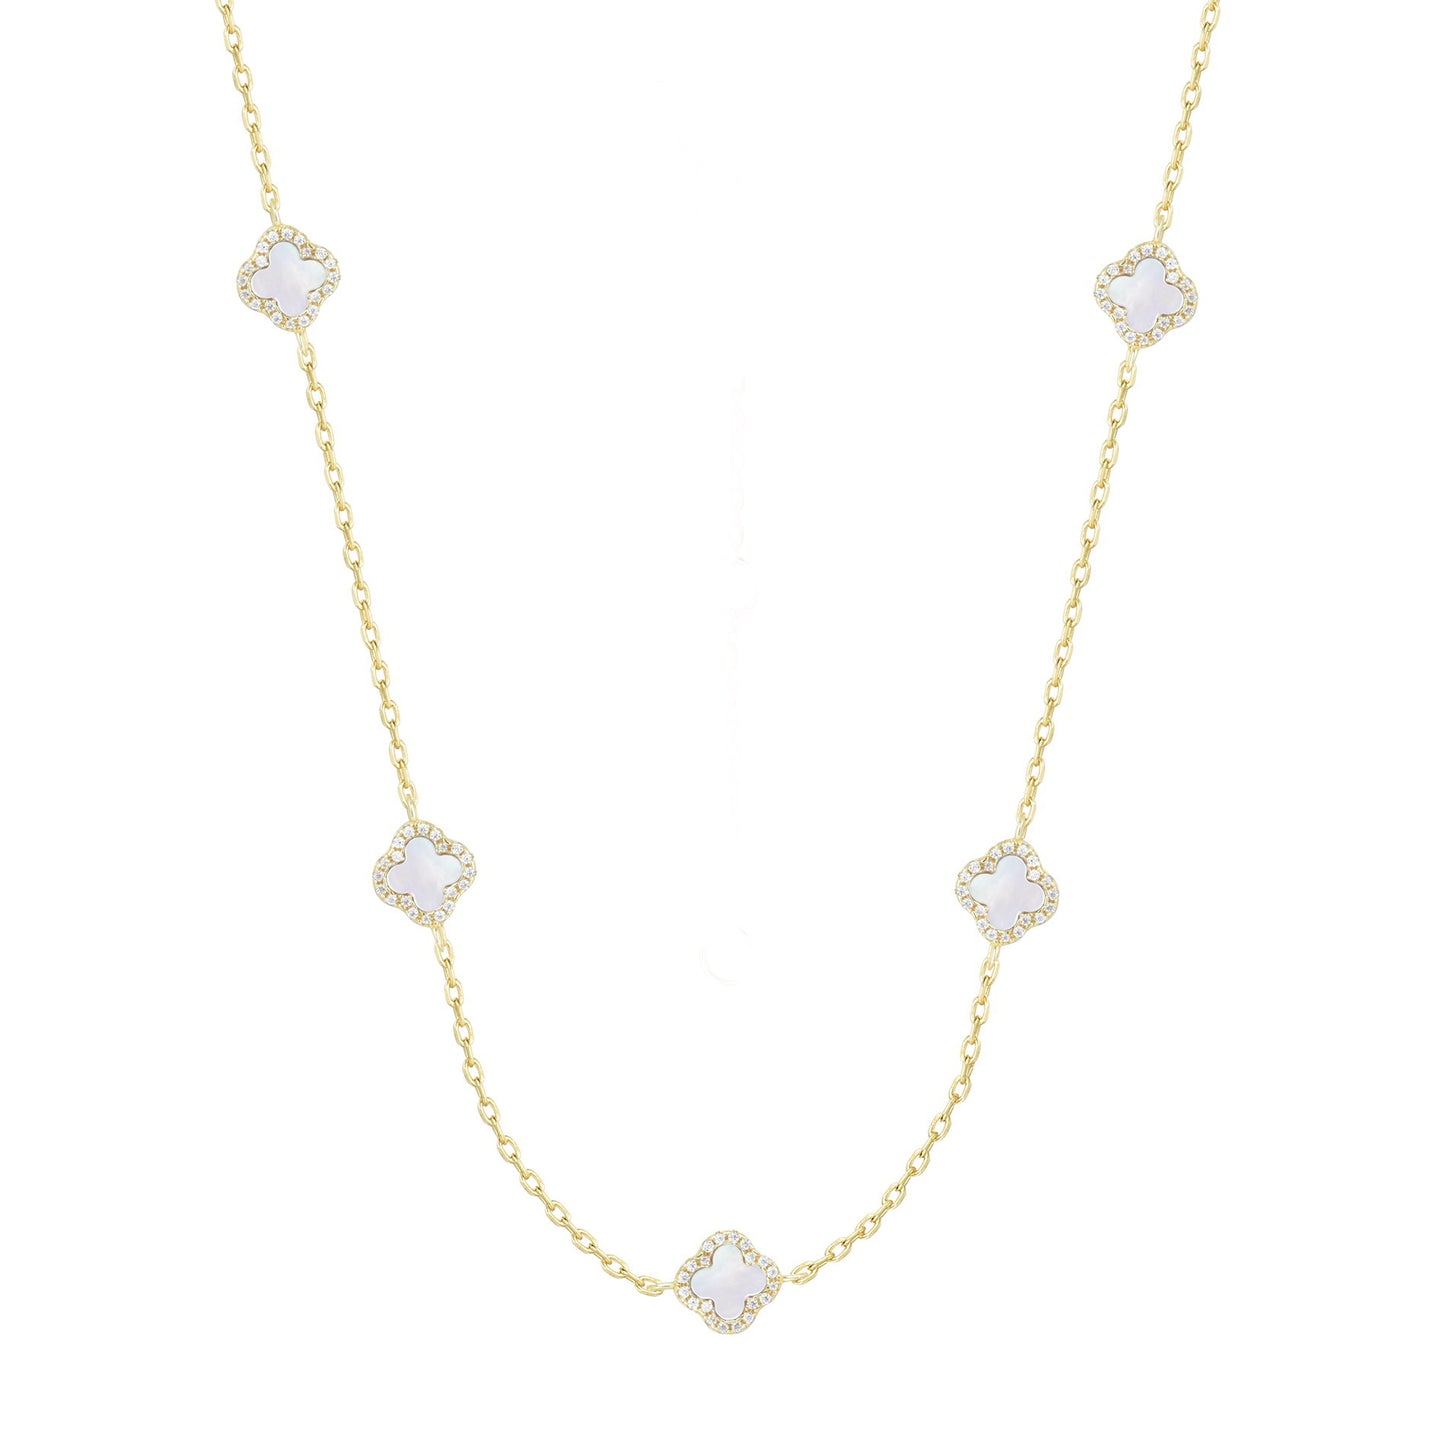 KIARA MINI MOTHER OF PEARL FIVE CLOVER GOLD NECKLACE